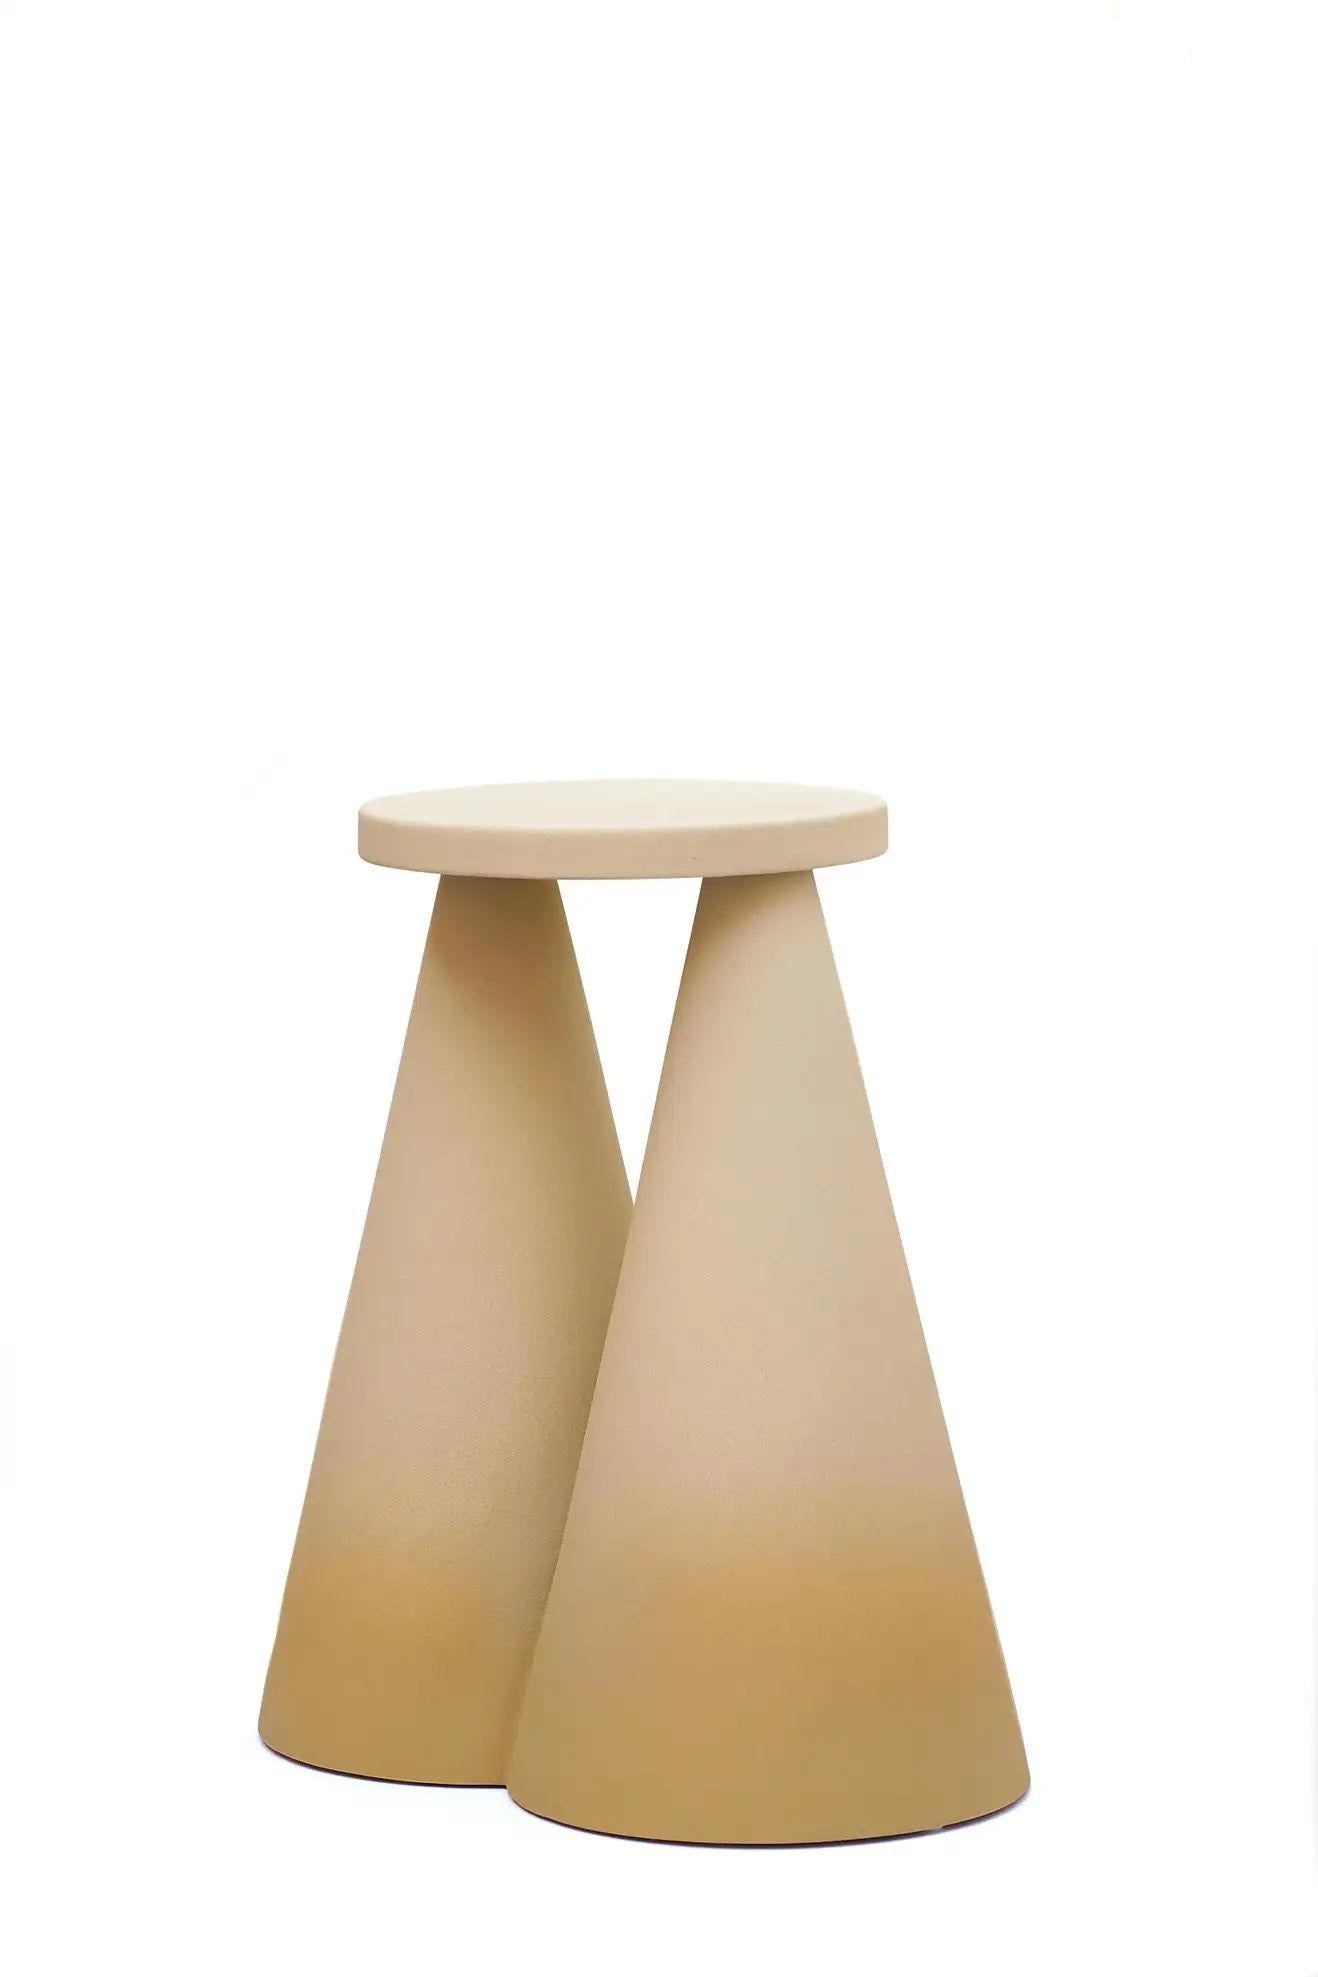 Isola Side Table by Cara Davide 9